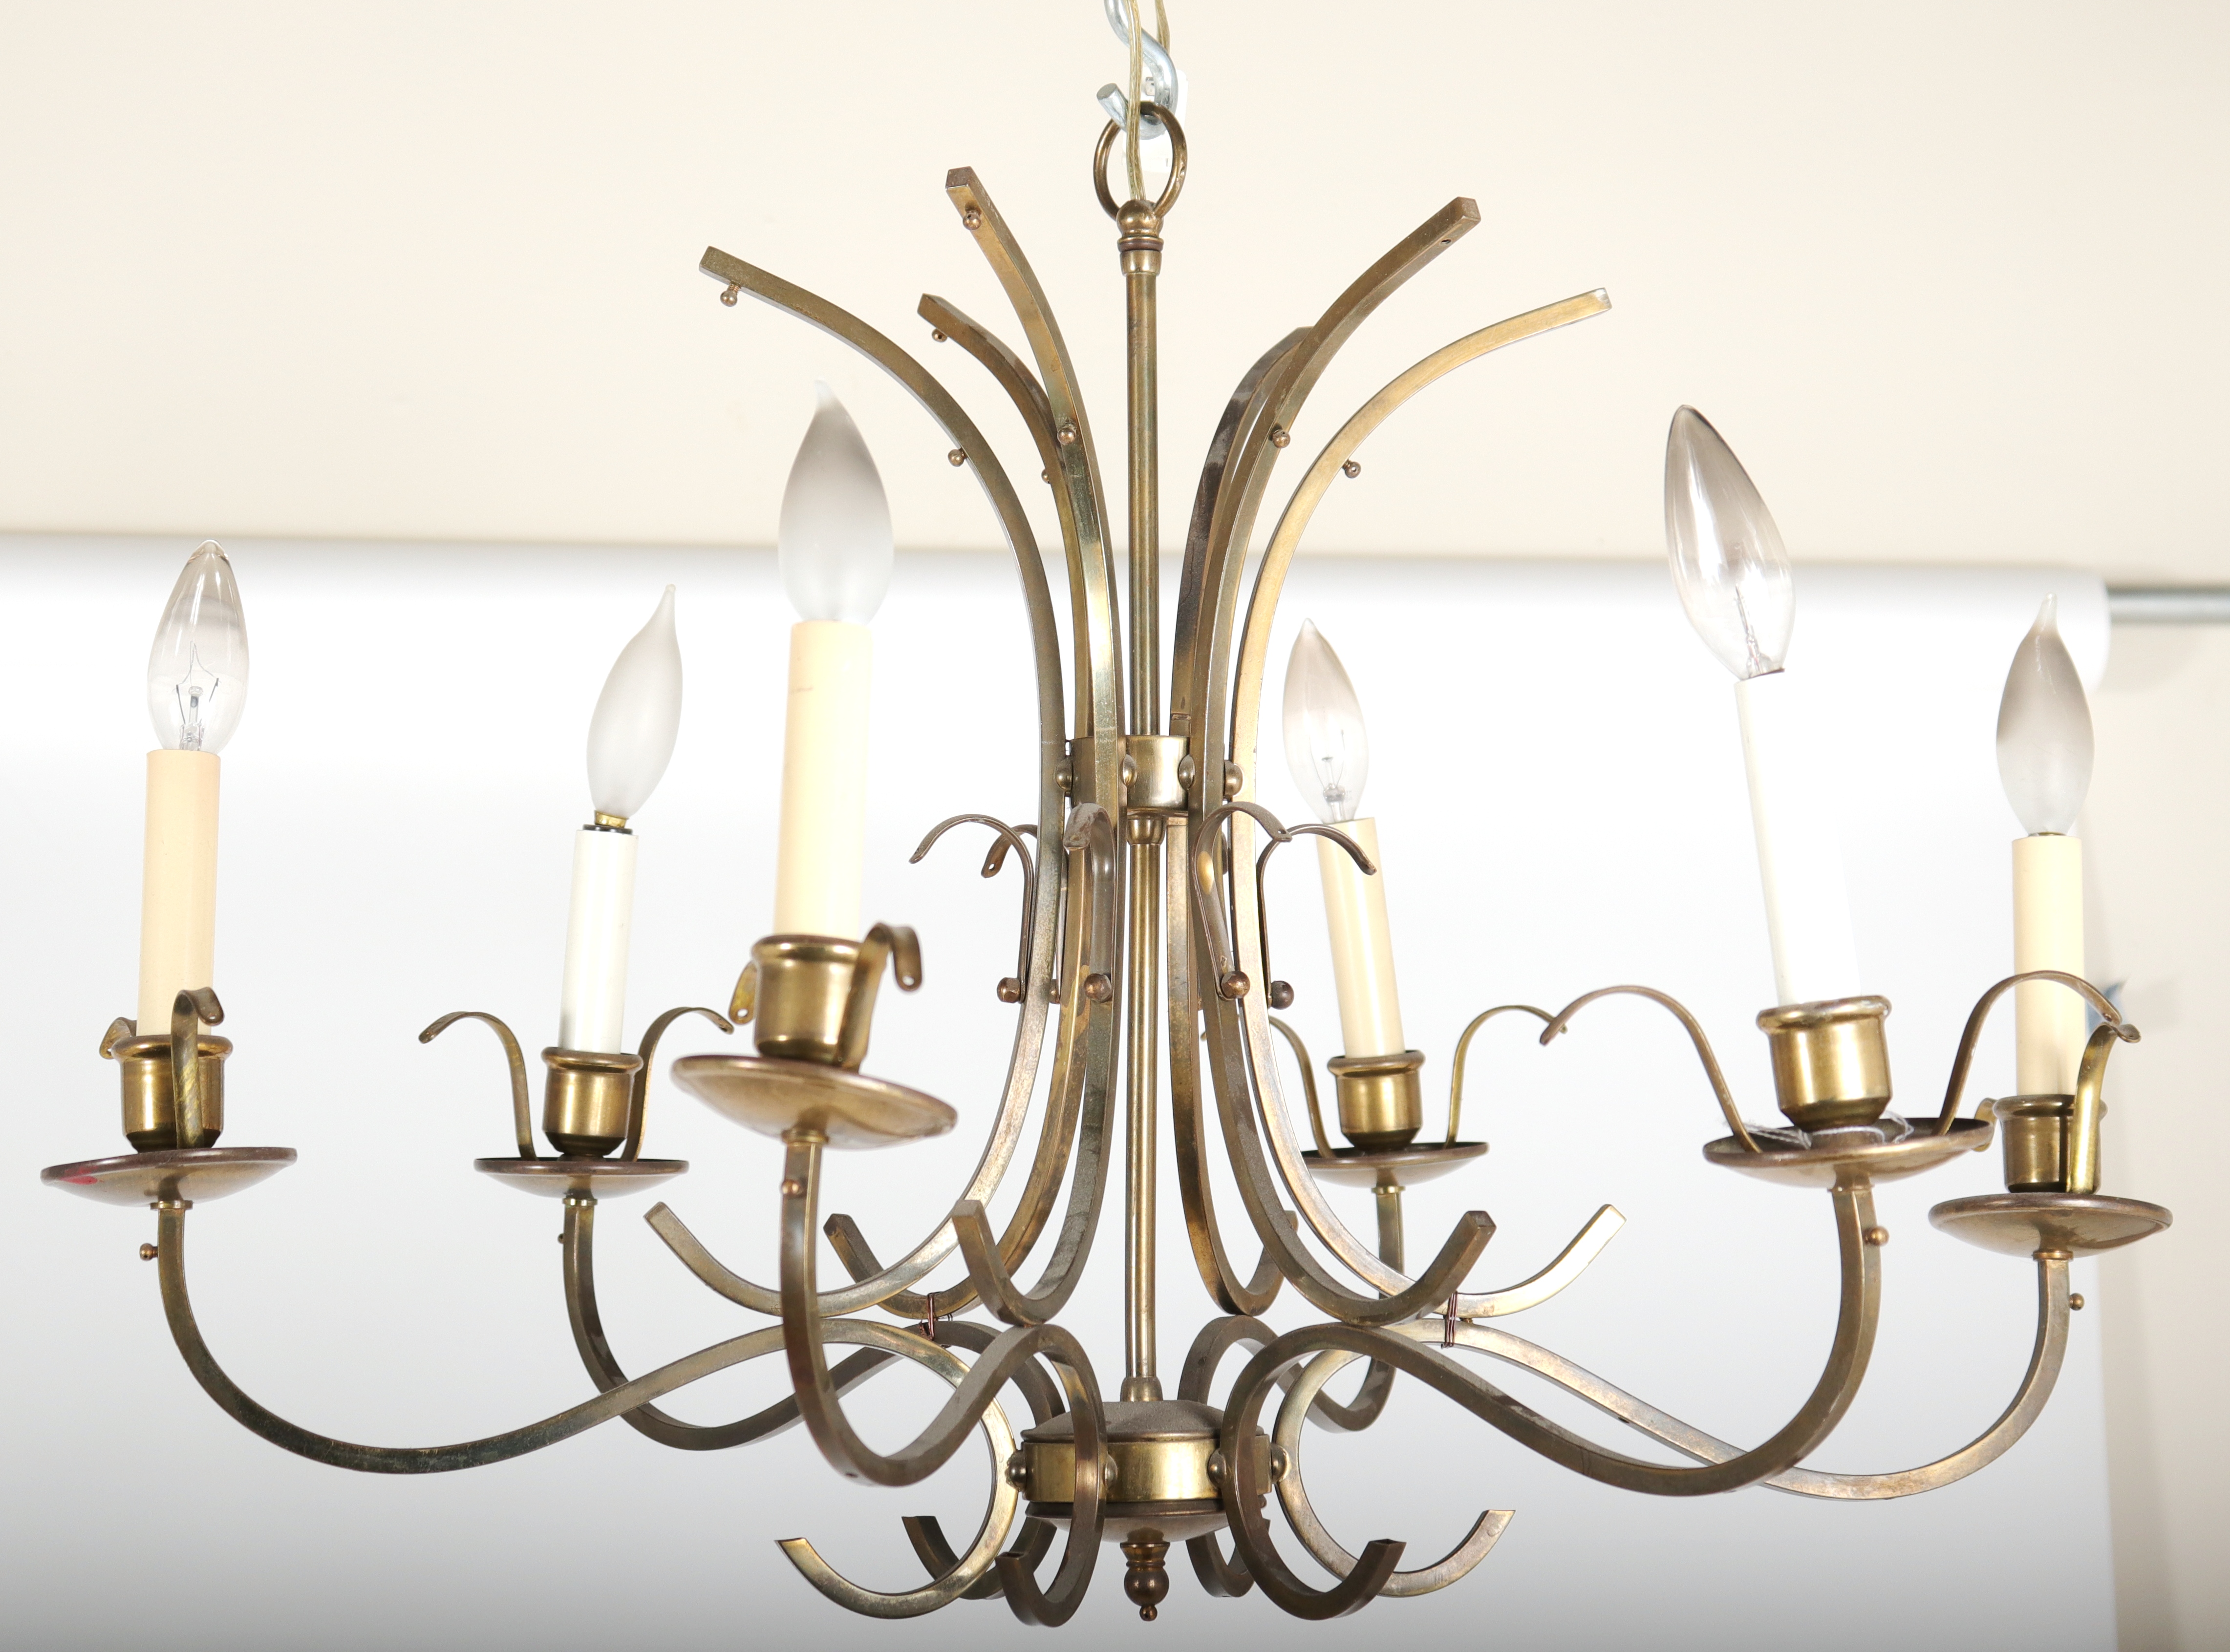 TRADITIONAL PATINATED BRASS CHANDELIER 3c2e6b